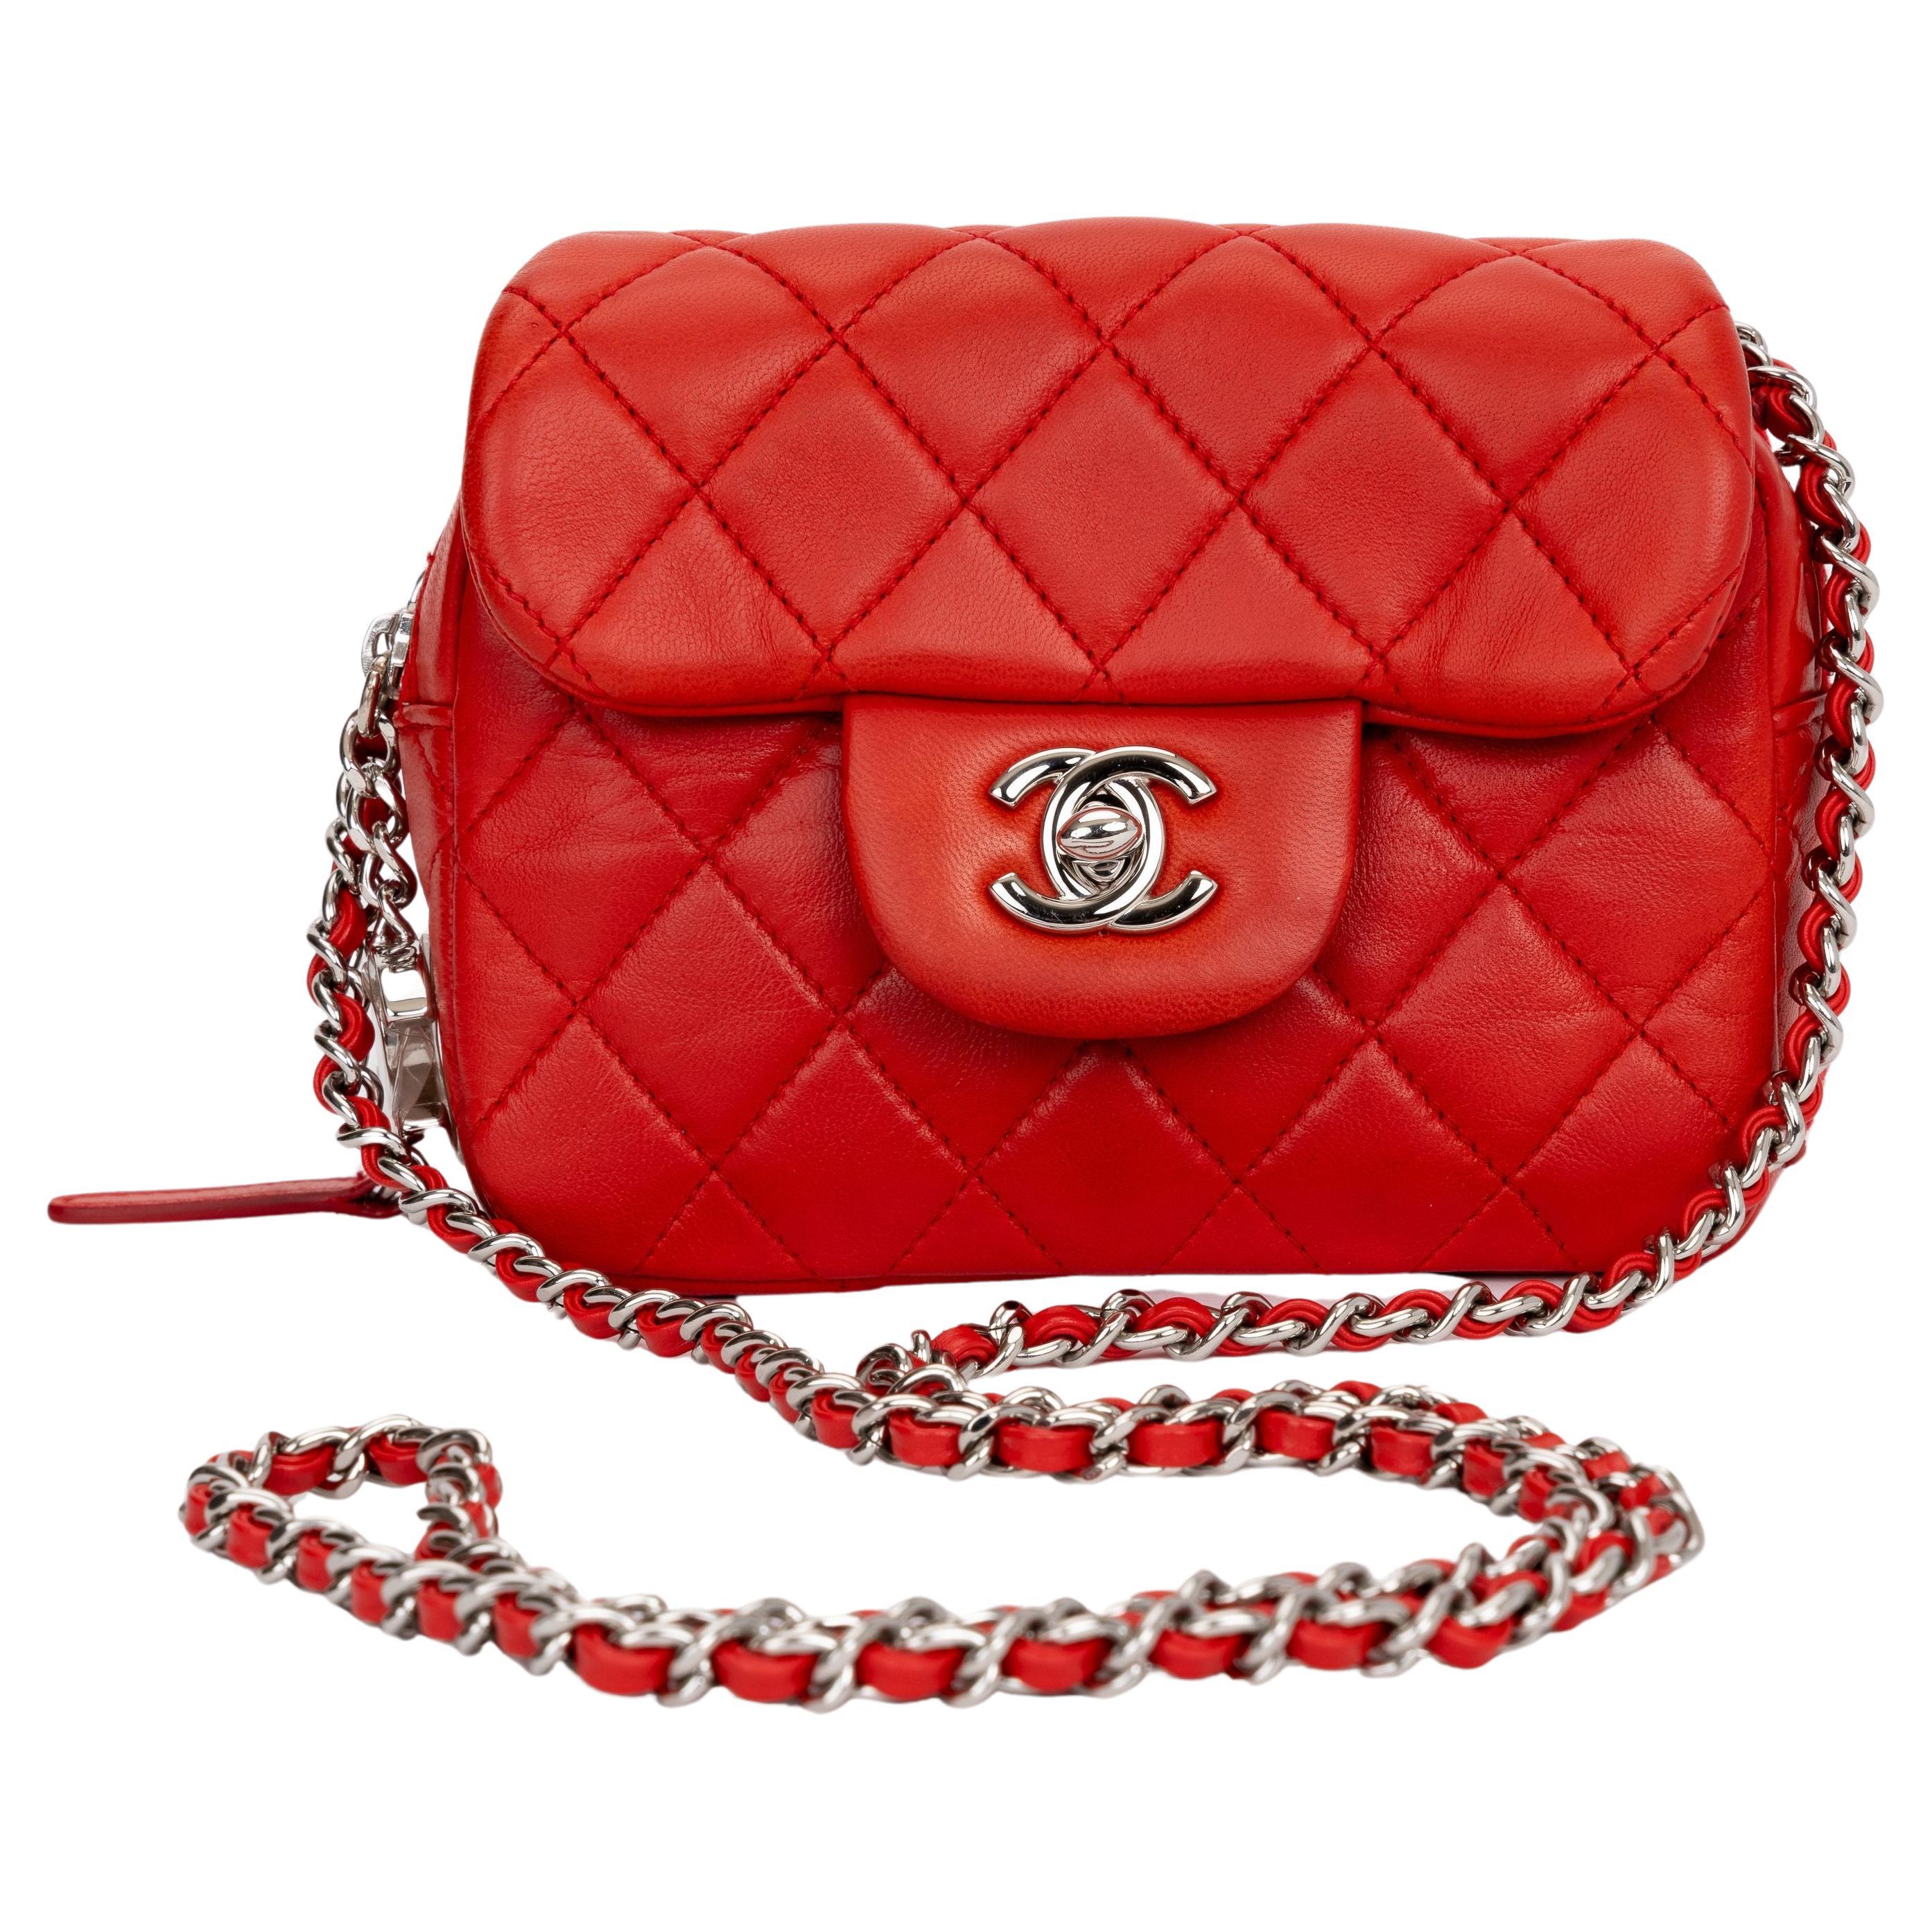 Chanel Red Leather Crossbody Flap Bag For Sale